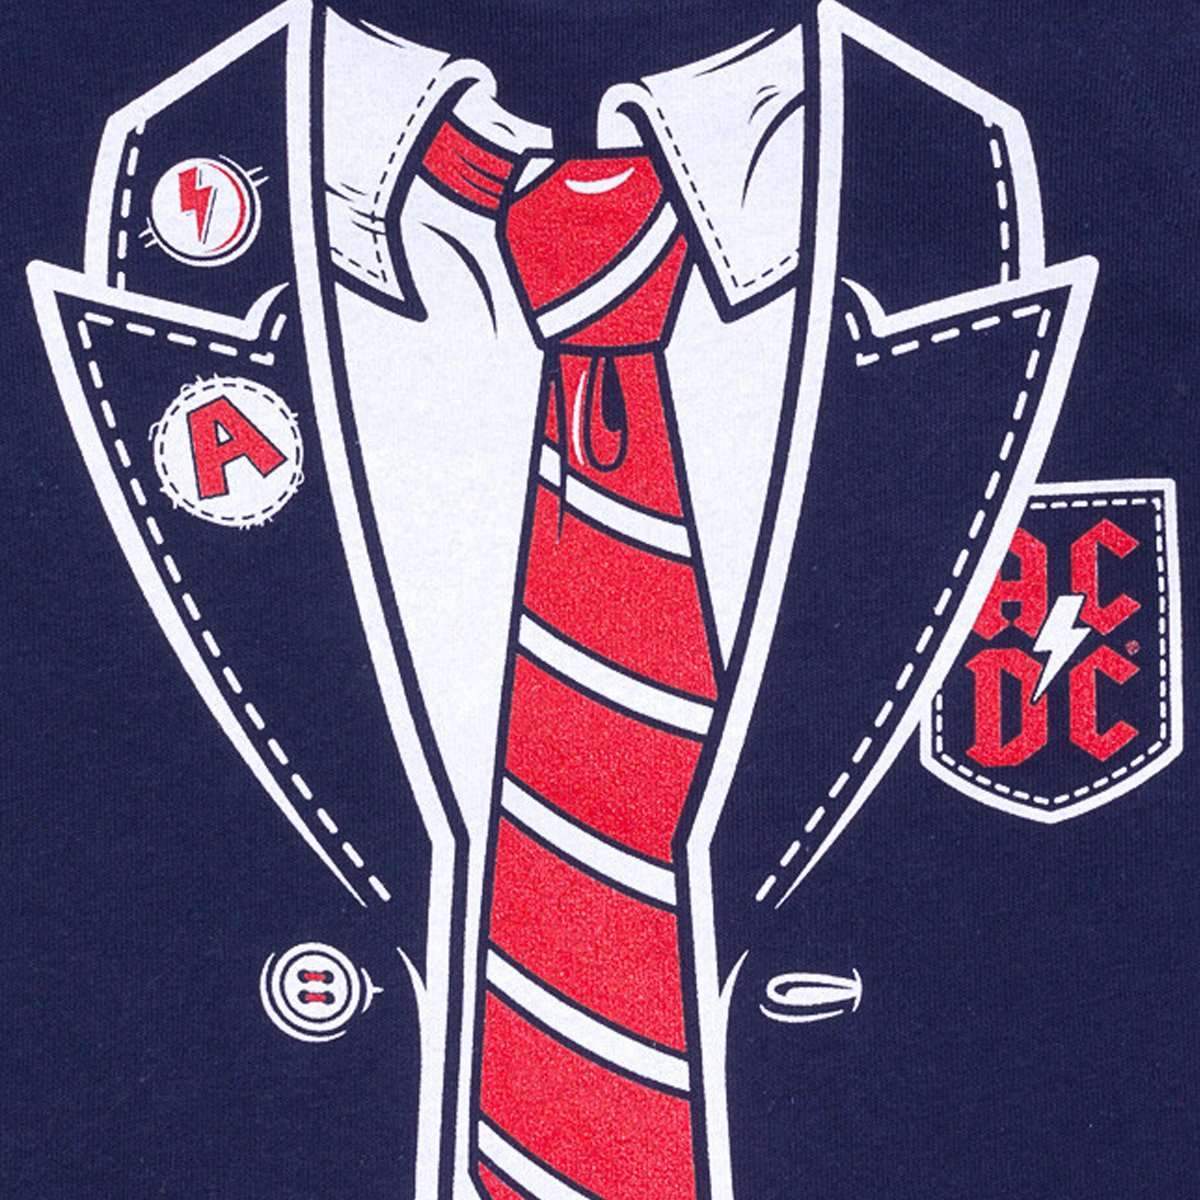 Kids ACDC Angus Young T-Shirt in red white and blue - close up detail